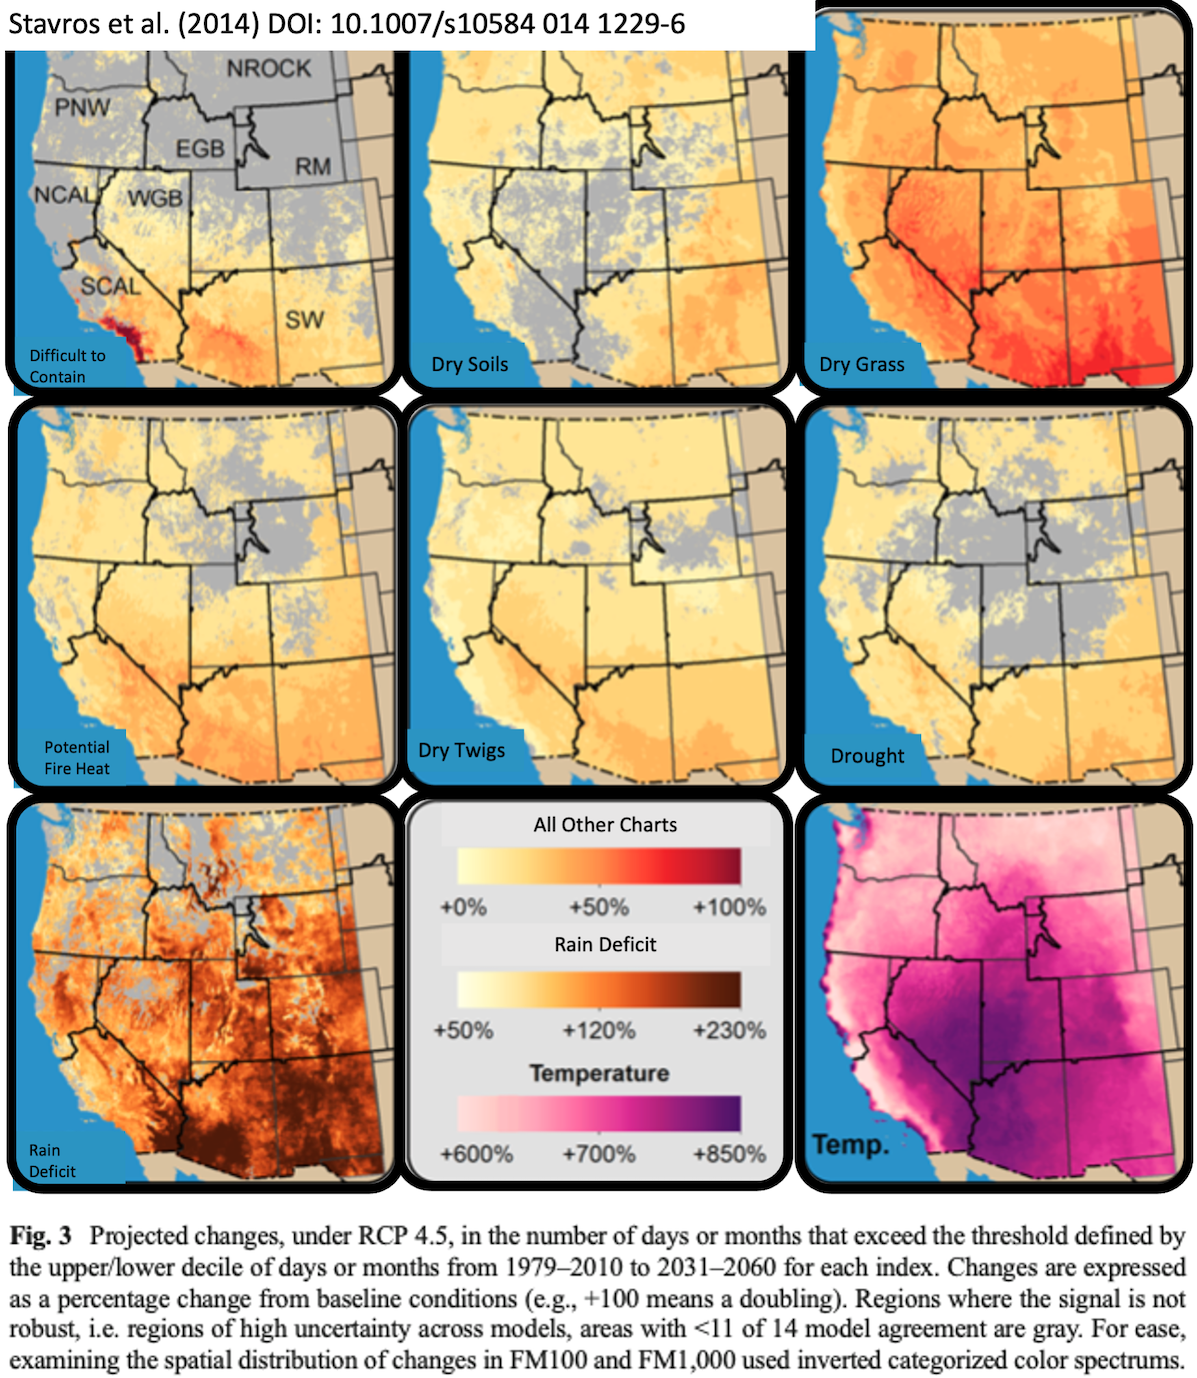 IPCC RCP 4.5 future scenario of fire conditions in the Western United States